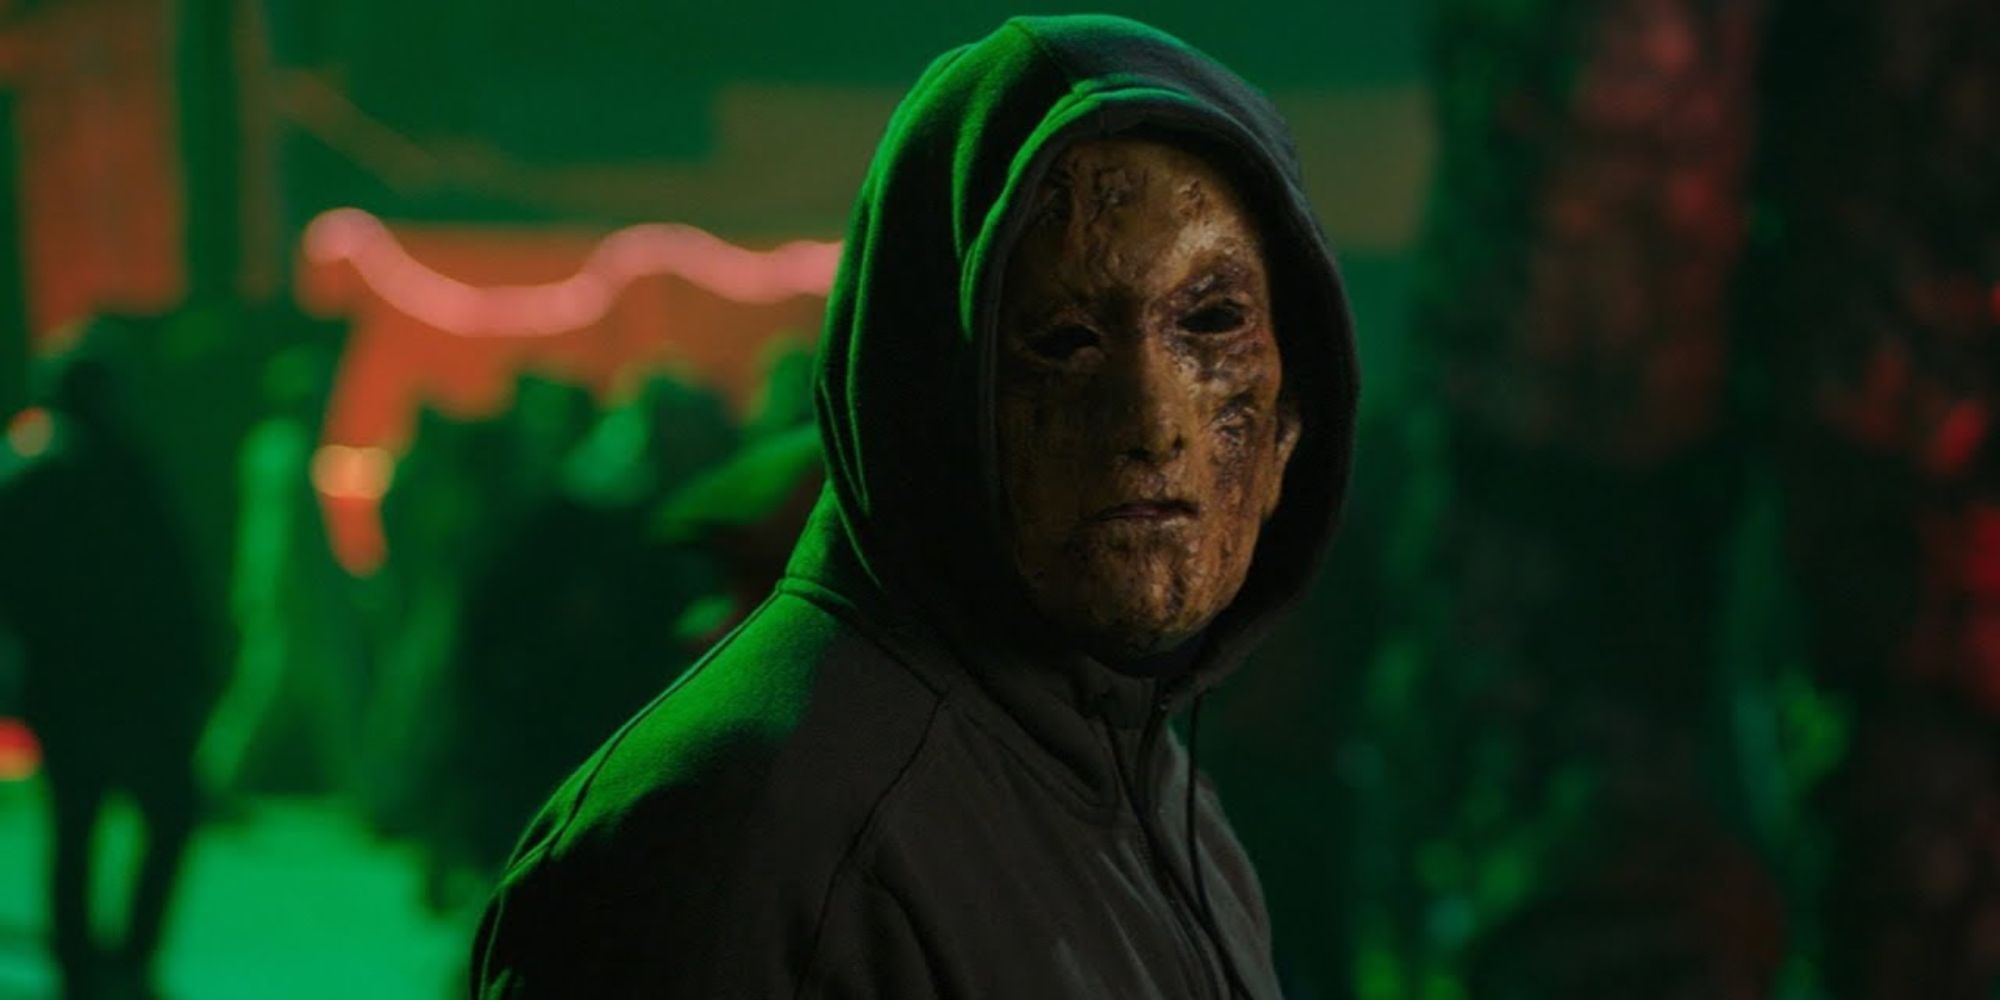 The masked killer from Hell Fest (2018)